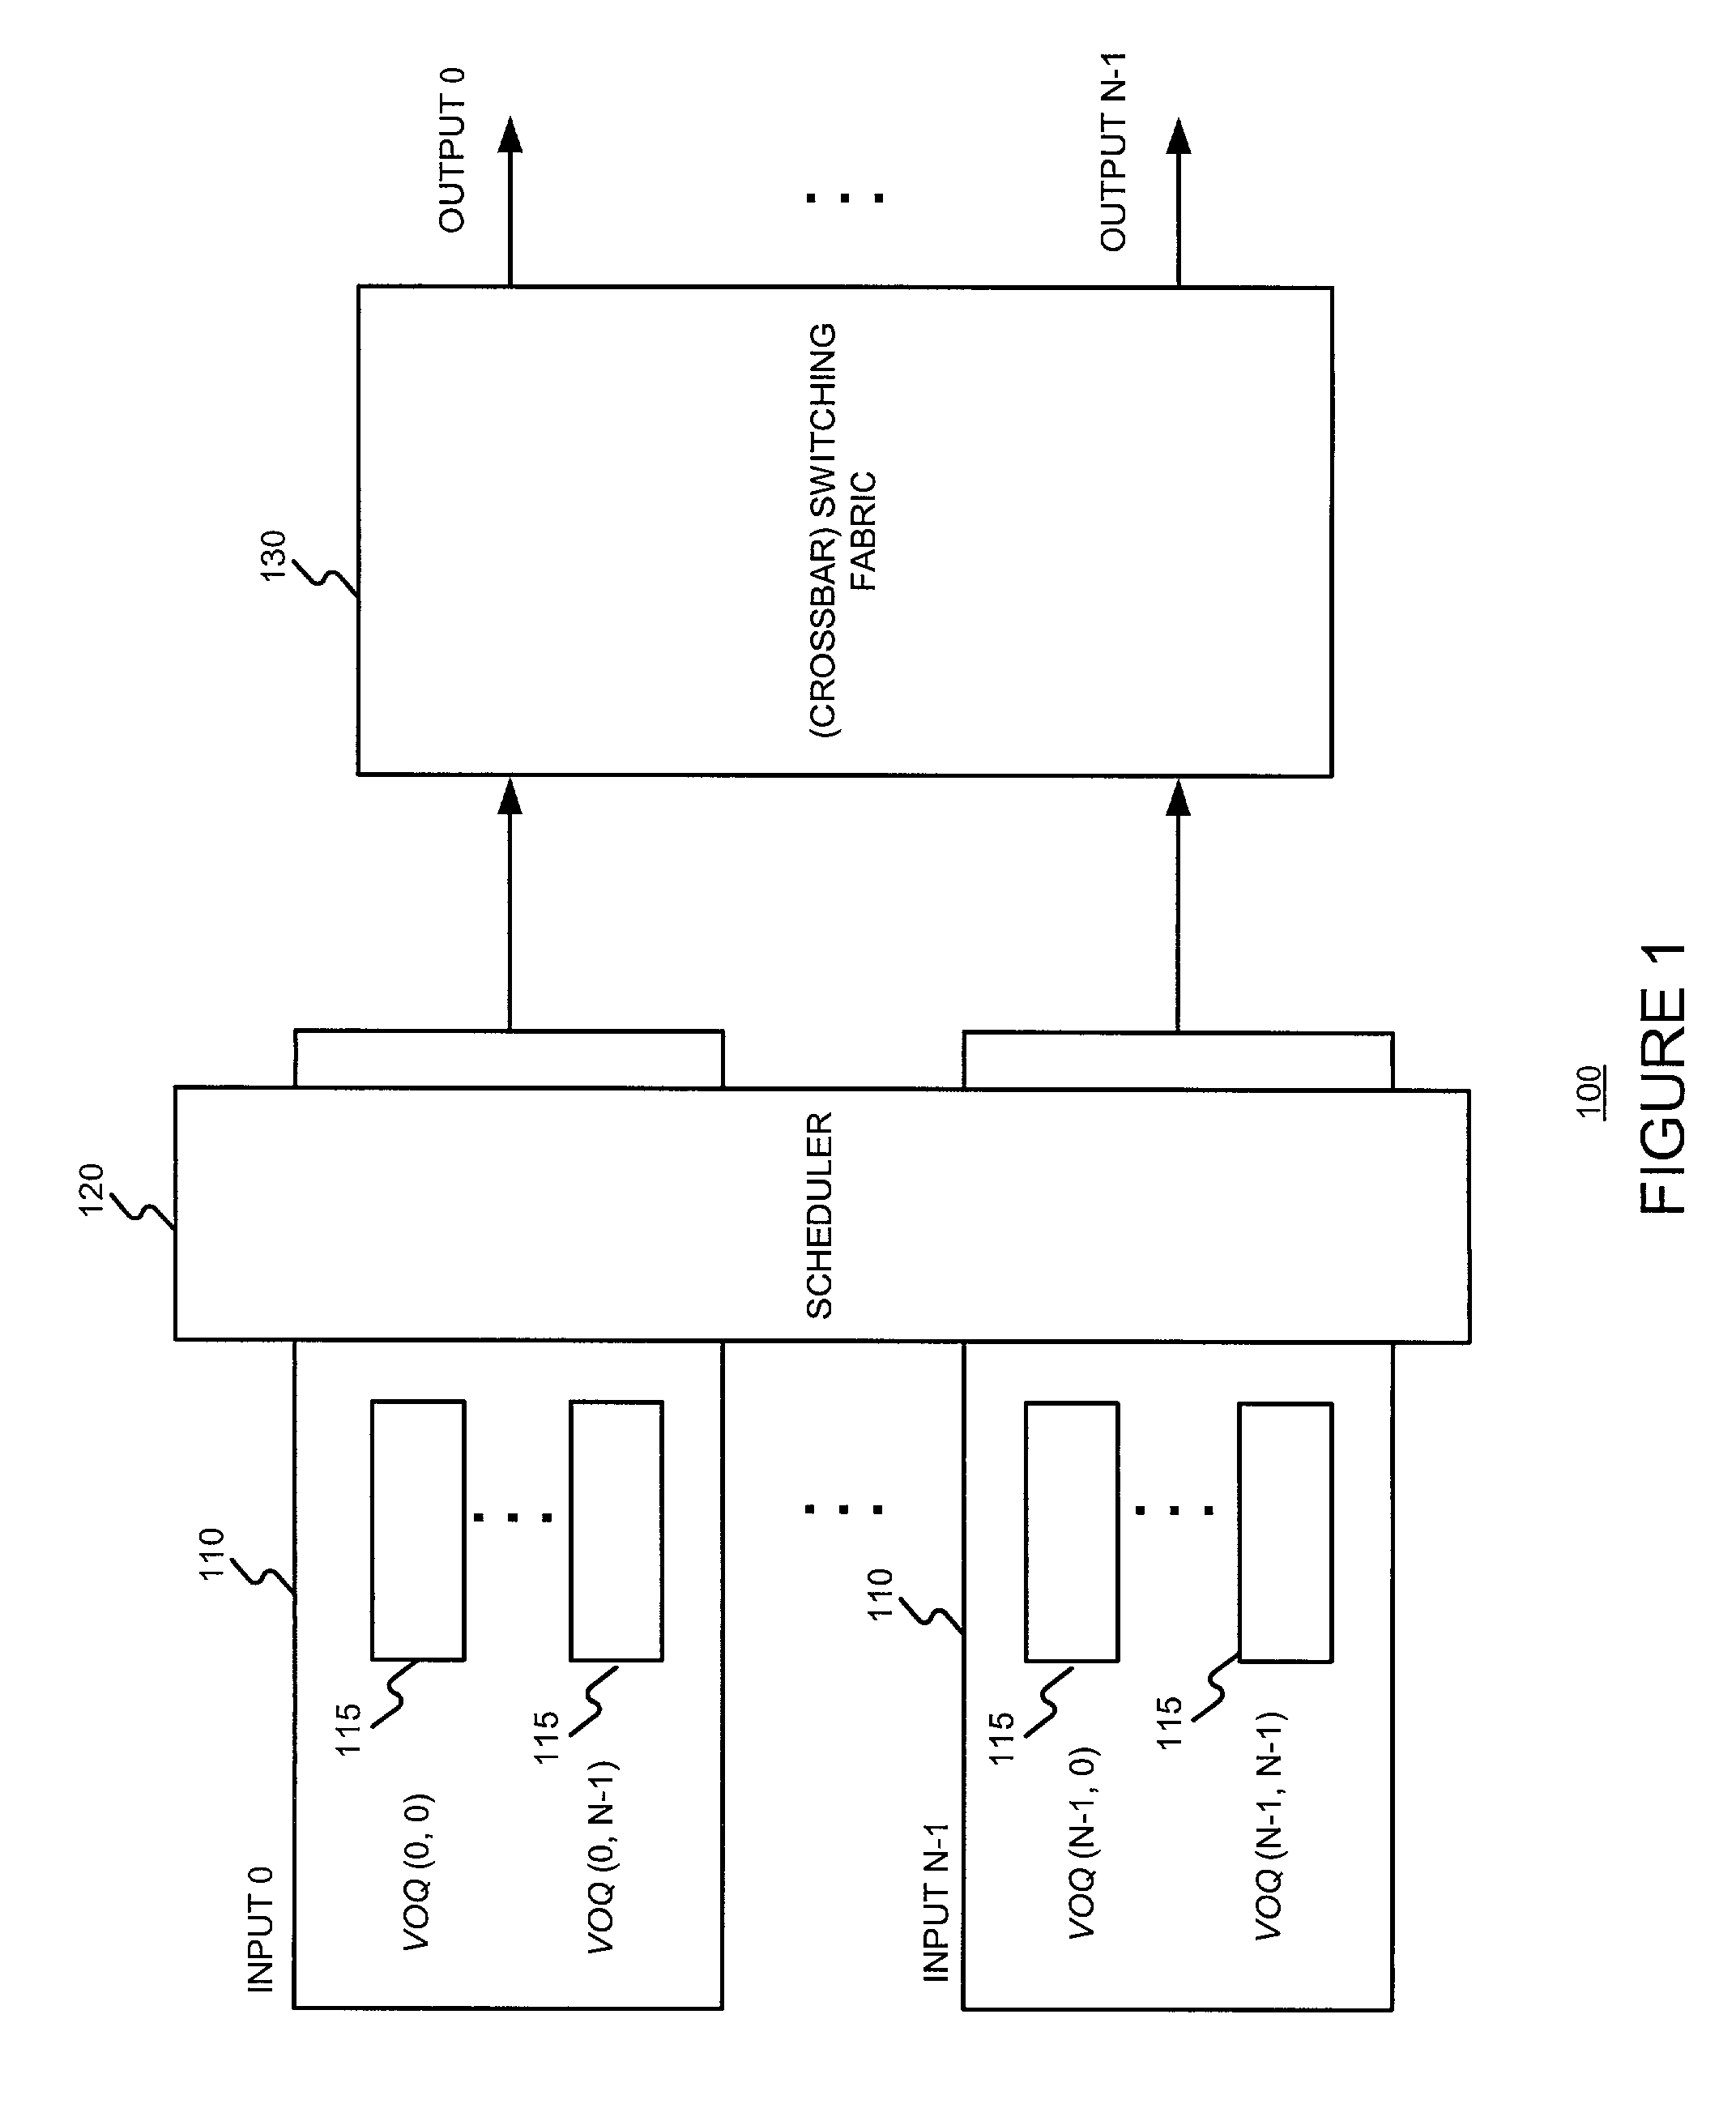 Pipelined maximal-sized matching cell dispatch scheduling